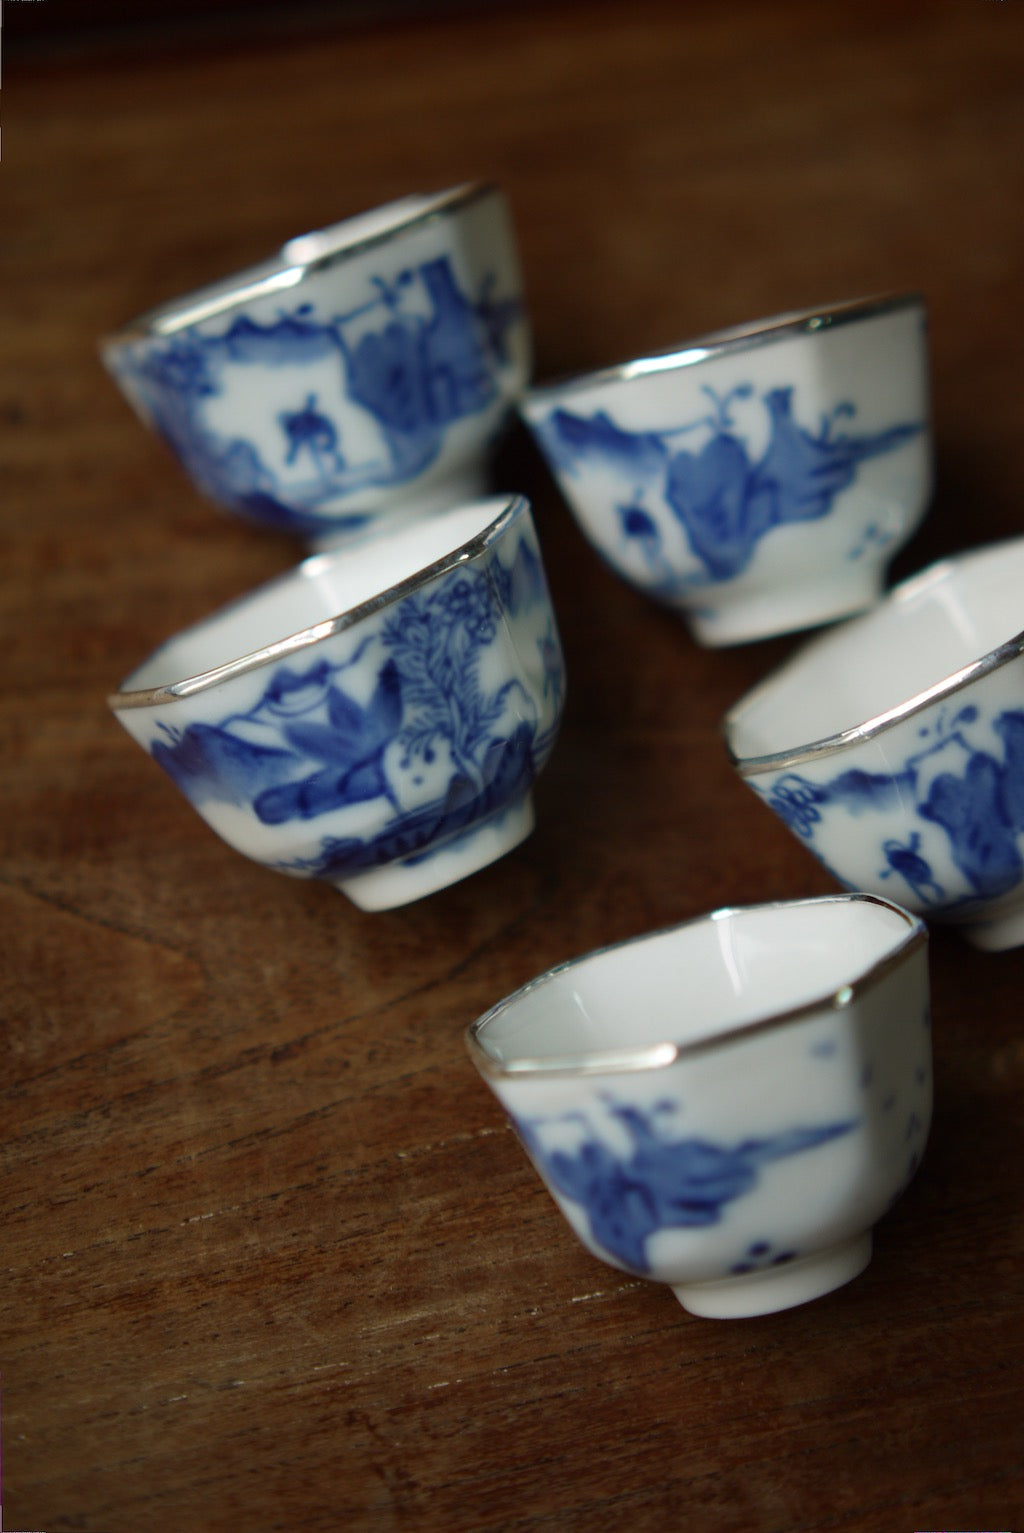 Vintage Blue and White Hand-Painting Silver on the top of rims Teacup Bestceramics